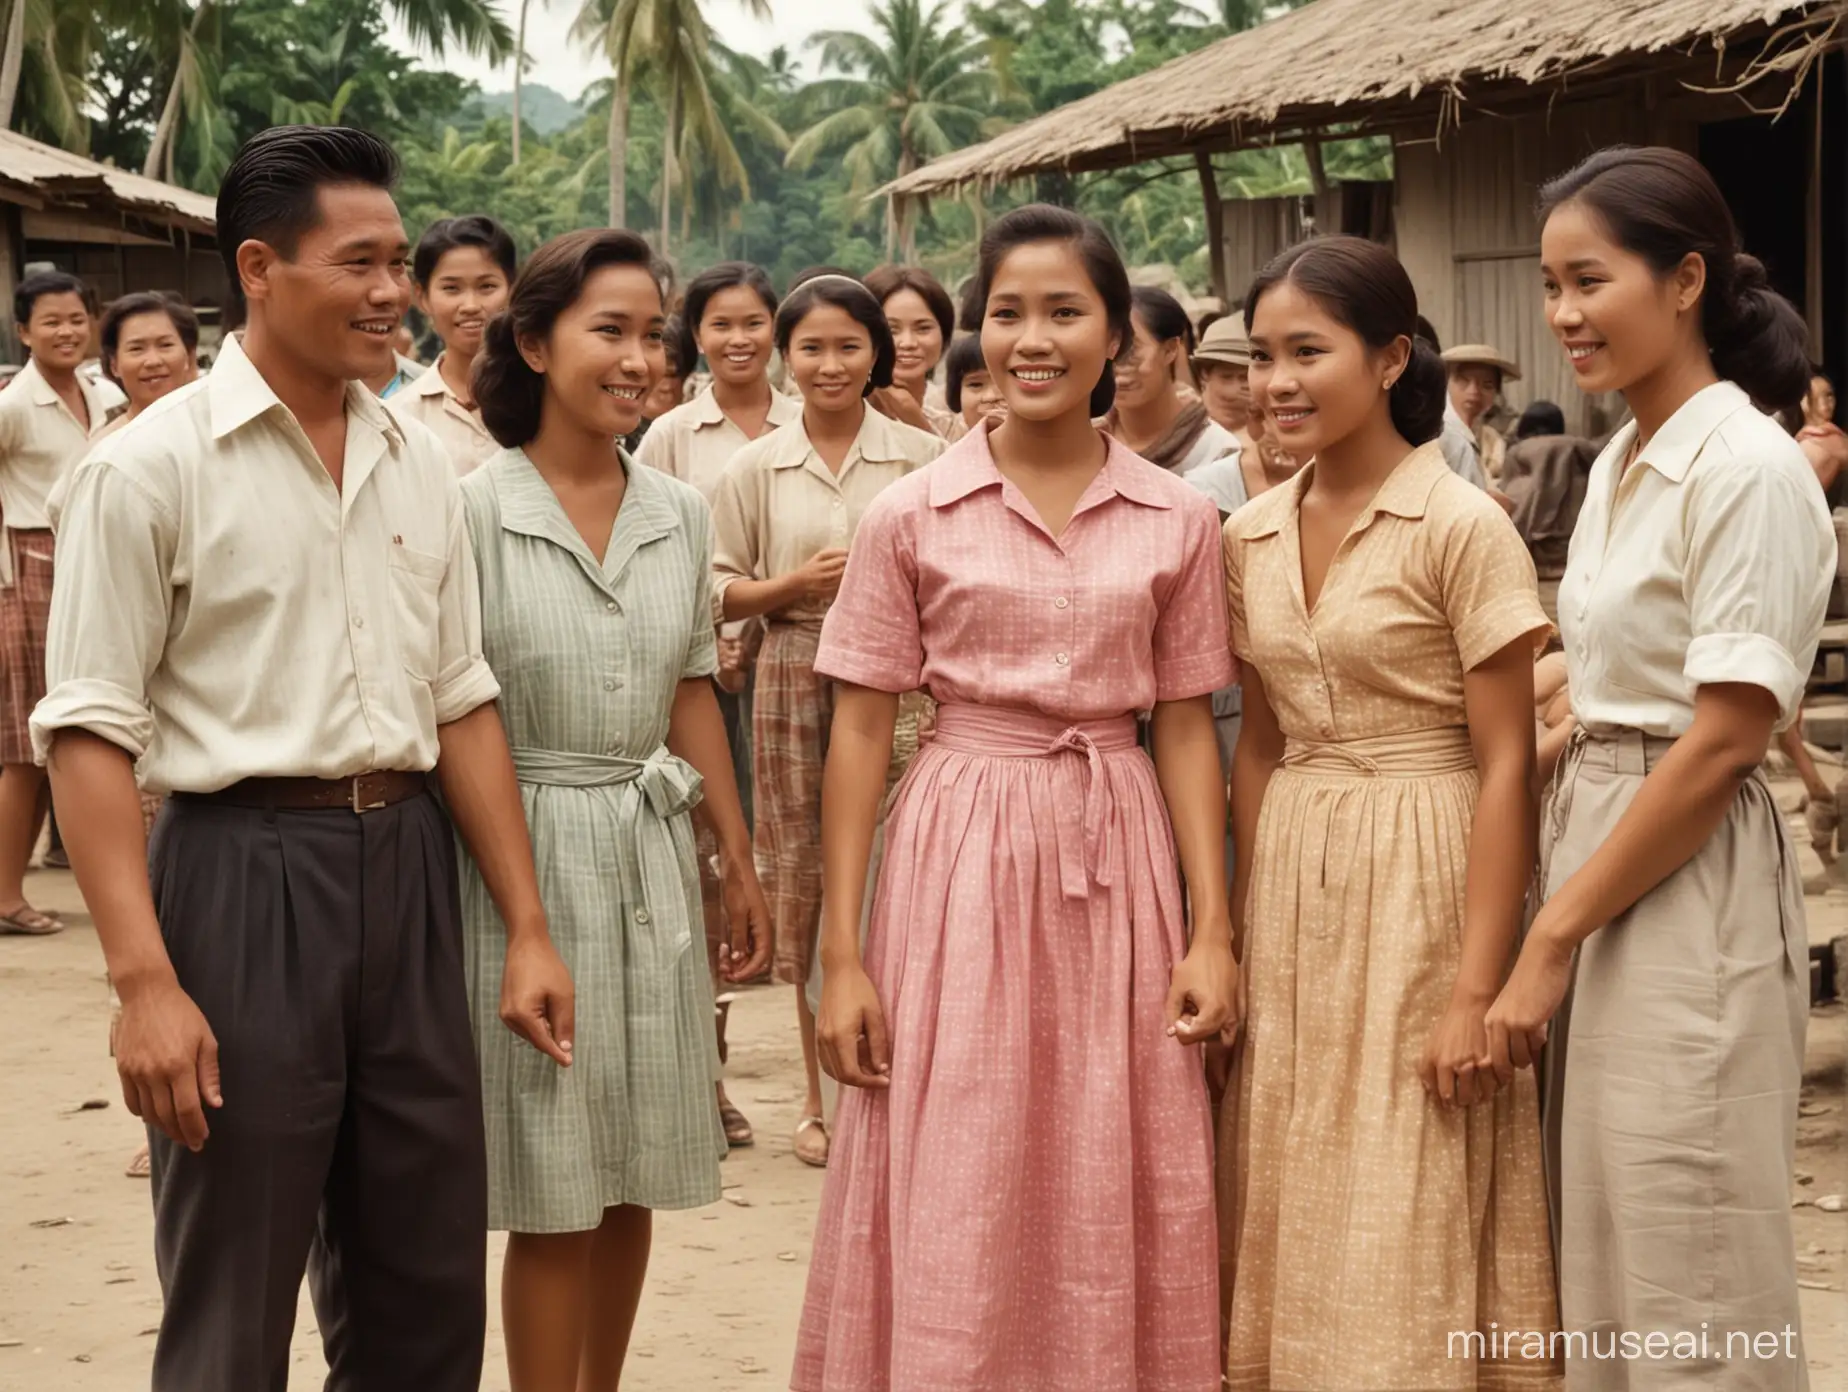 Filipina Invited to Rural Village Feast with Friends in 1950s Philippines